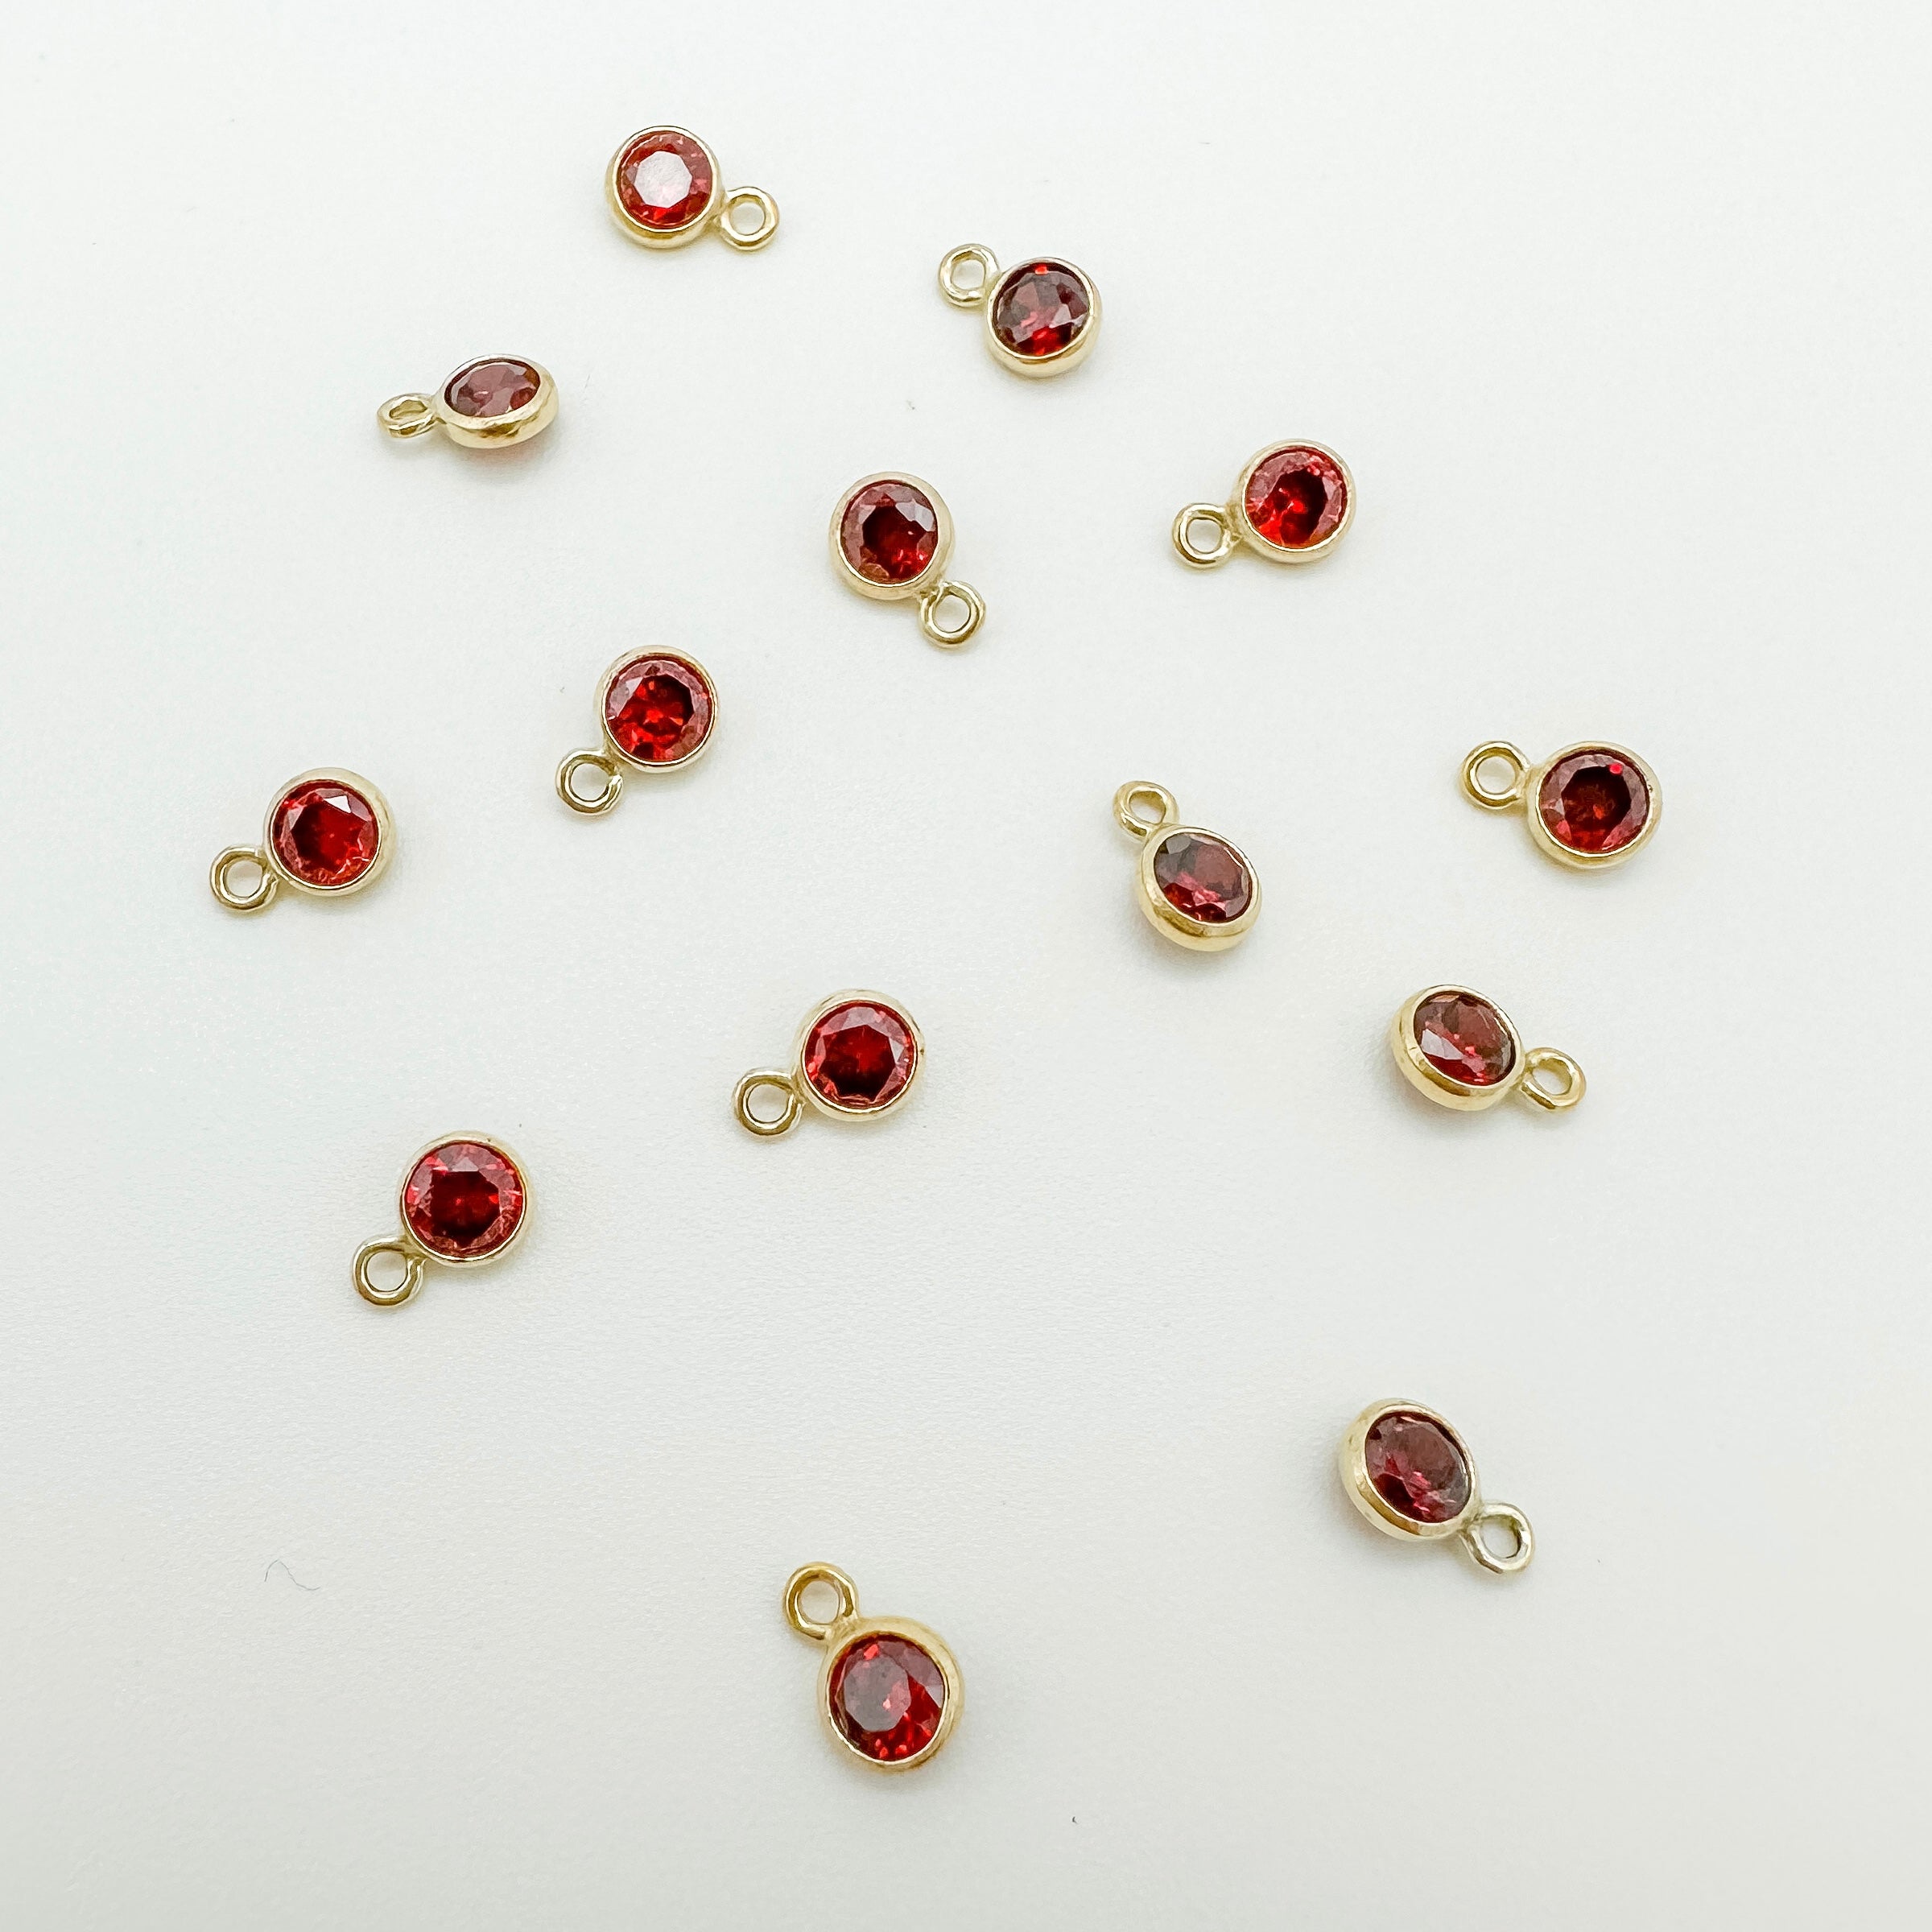 3mm GF birthstone connector / permanent jewelry supplies